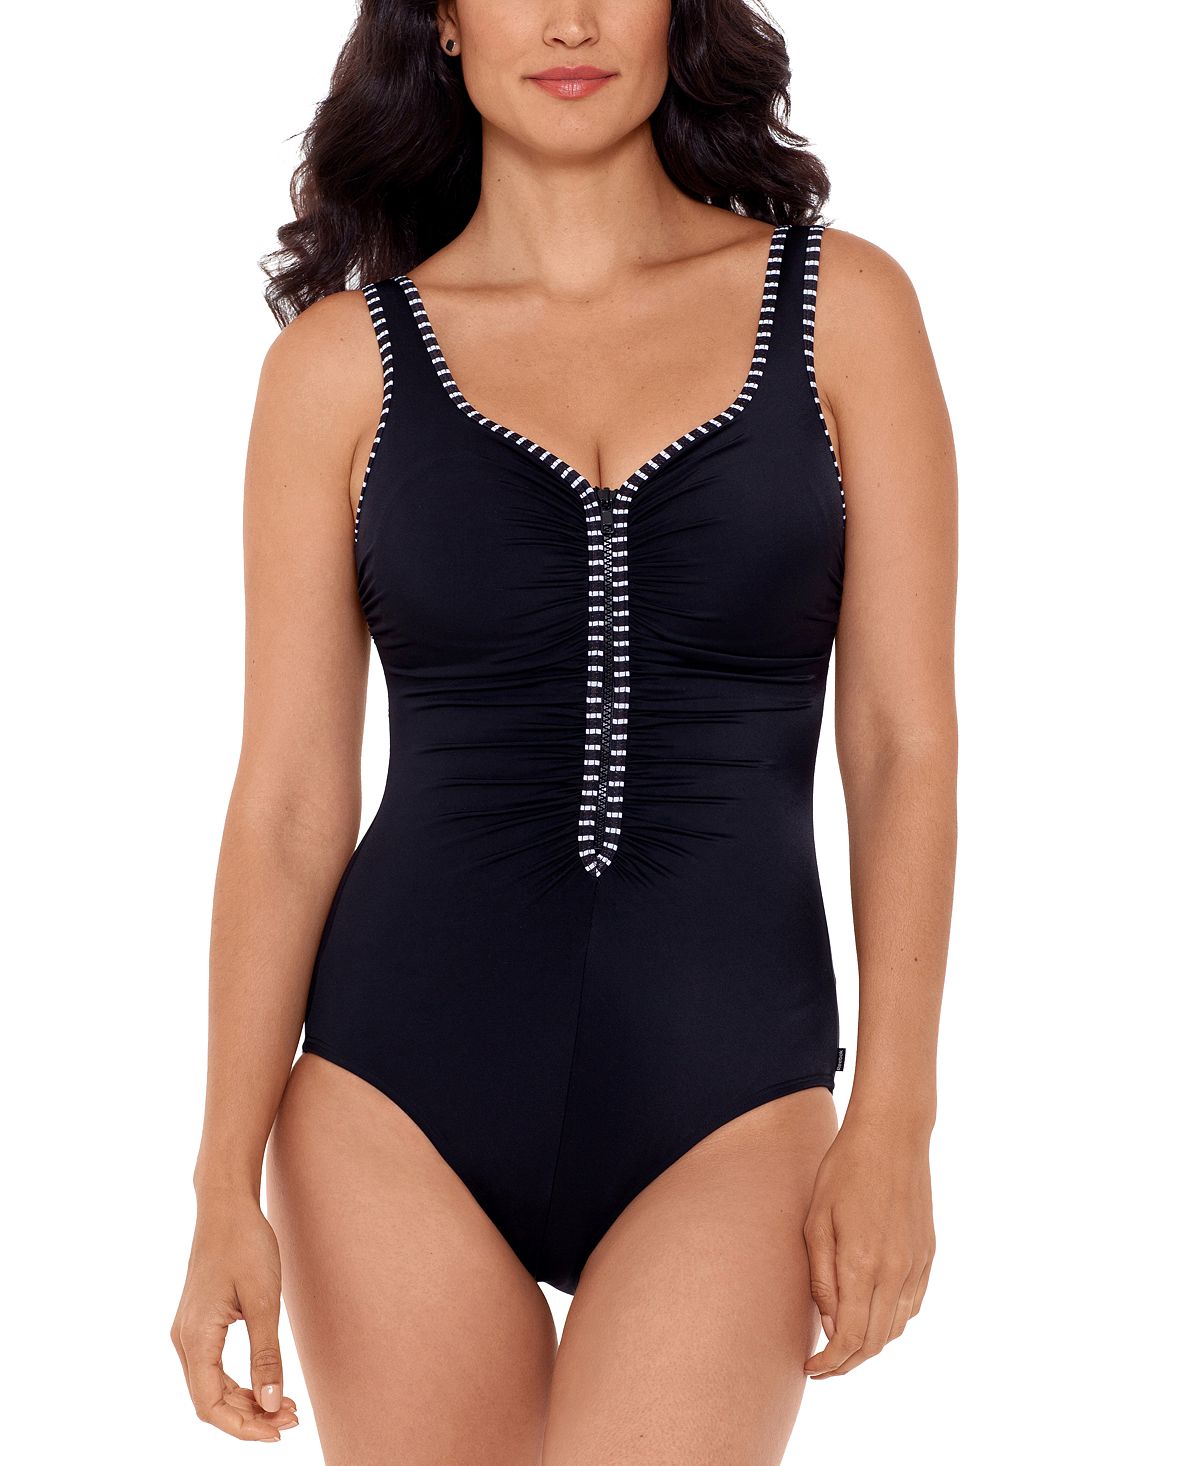 Reebok Our Zips Are Sealed Zipper One-piece Swimsuit Black